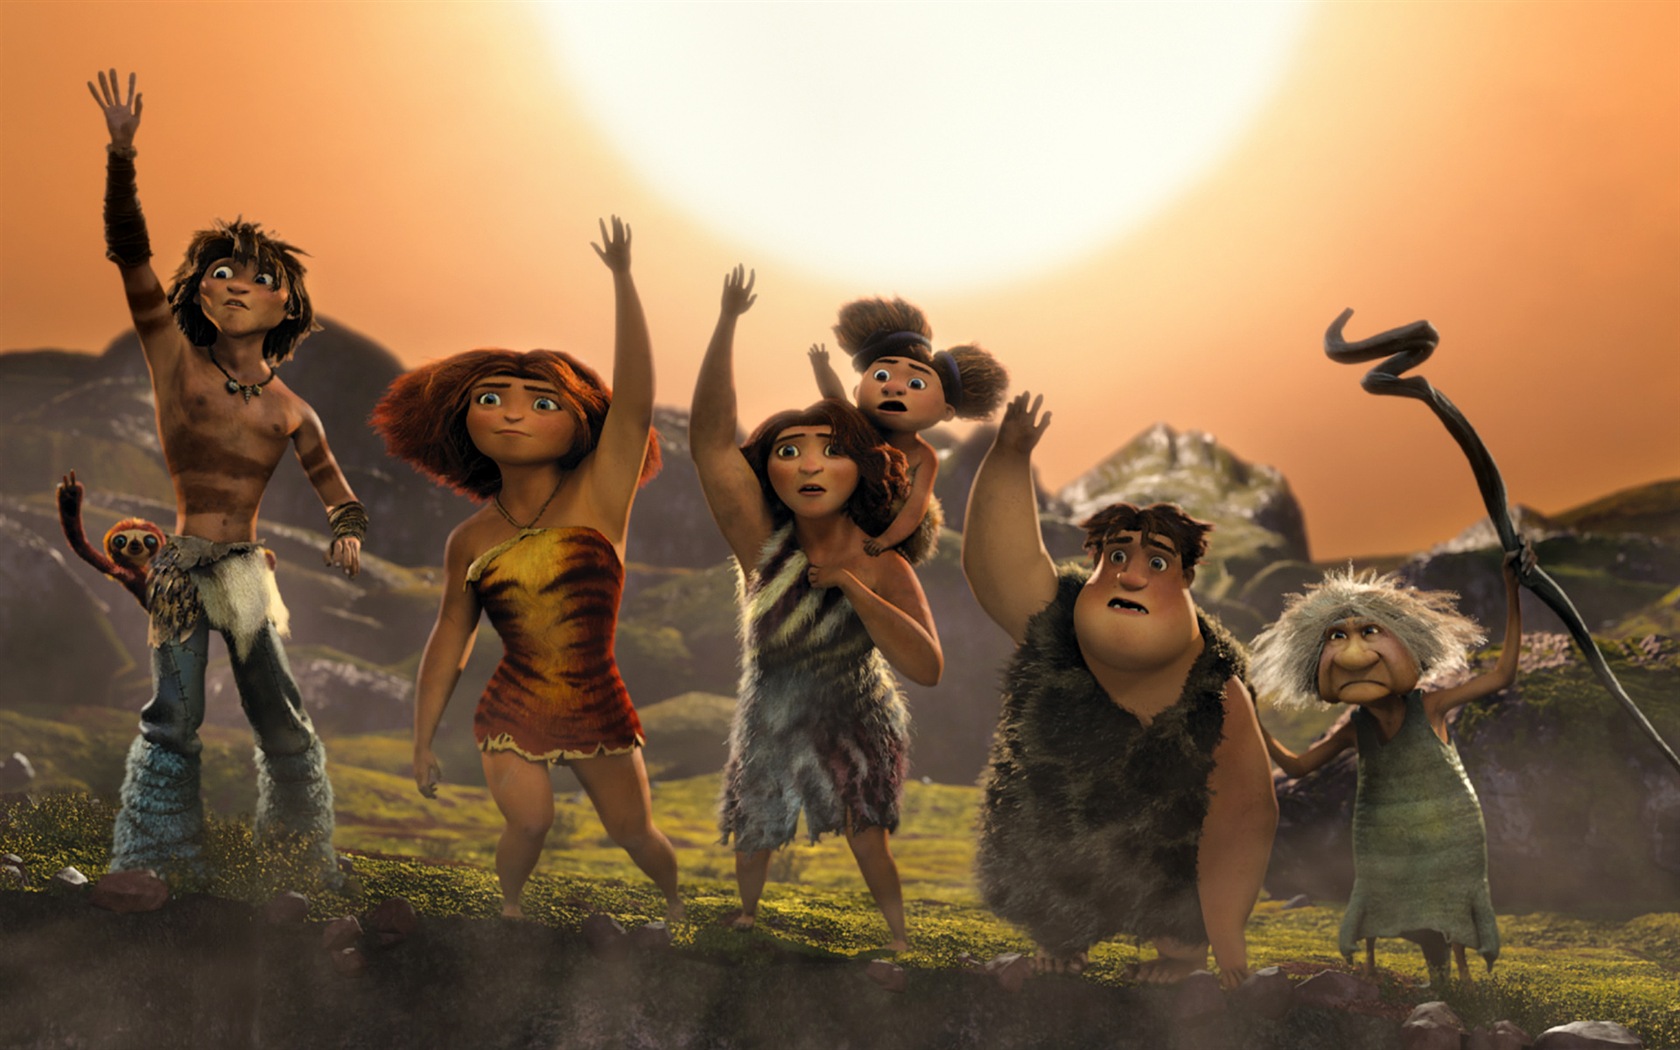 The Croods HD movie wallpapers #4 - 1680x1050